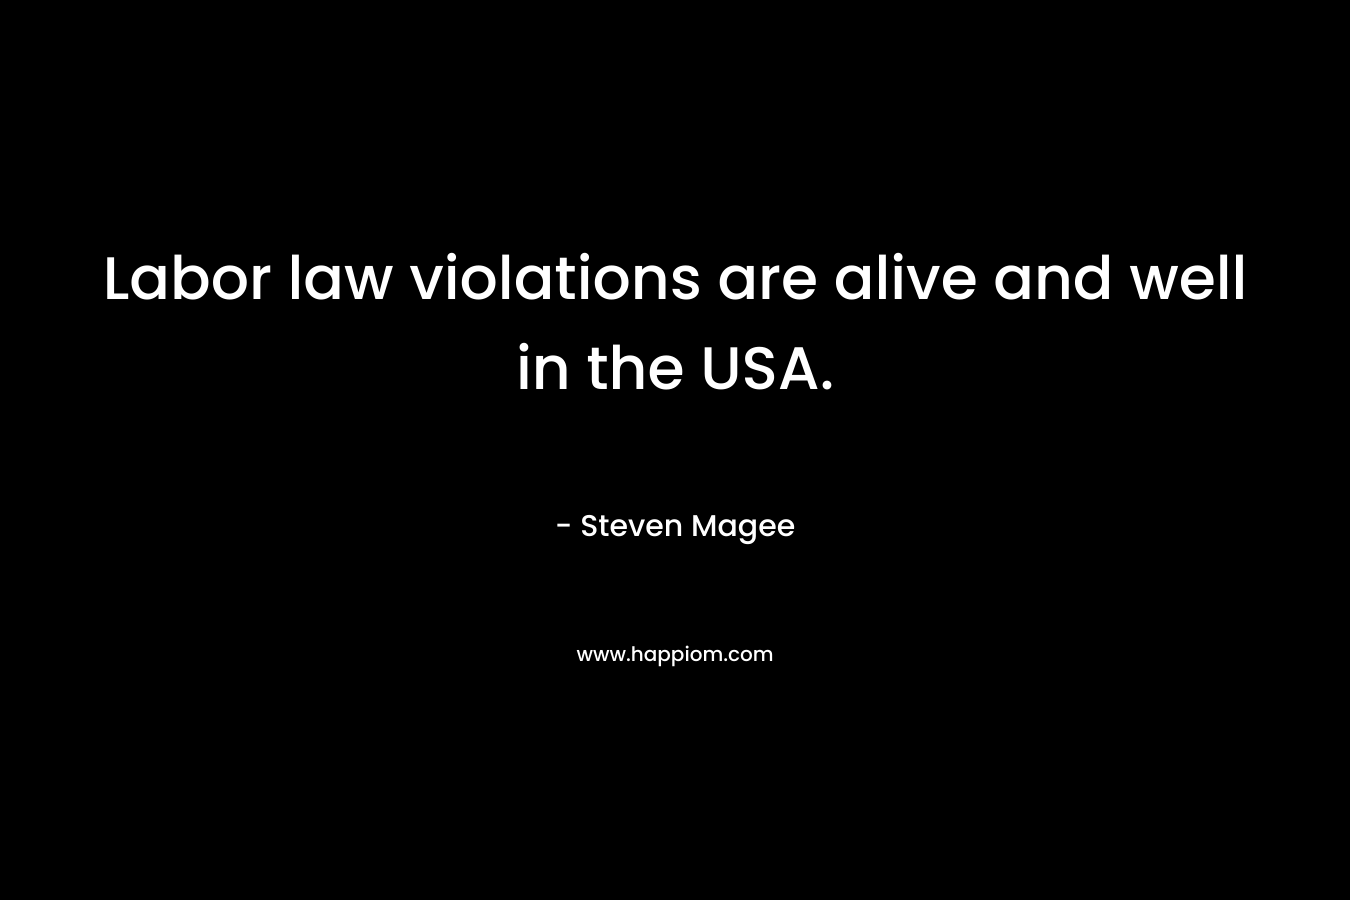 Labor law violations are alive and well in the USA. – Steven Magee